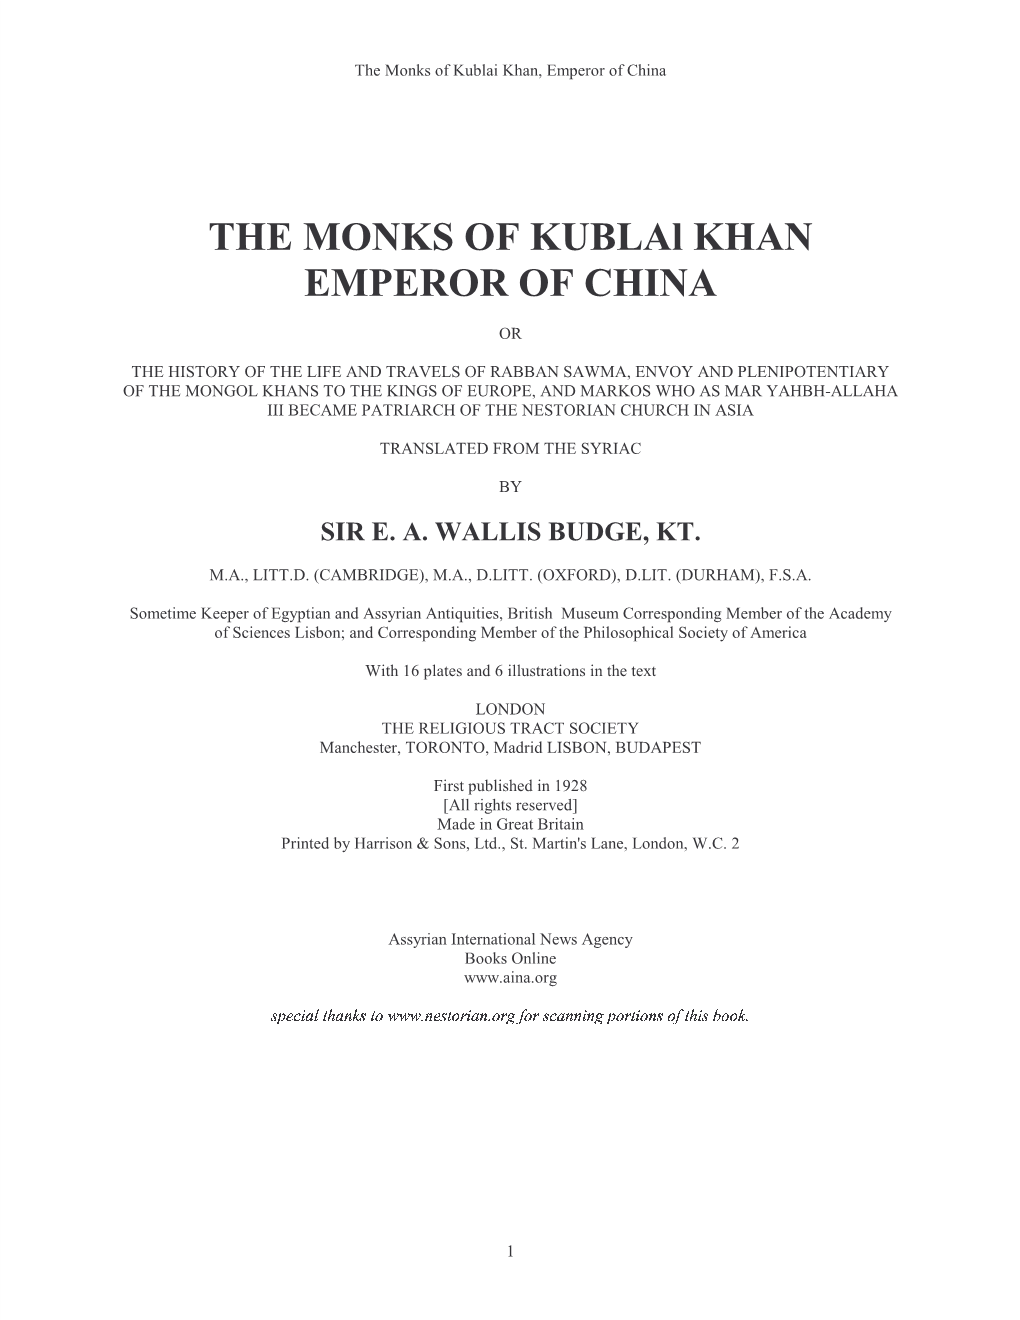 THE MONKS of Kublal KHAN EMPEROR of CHINA